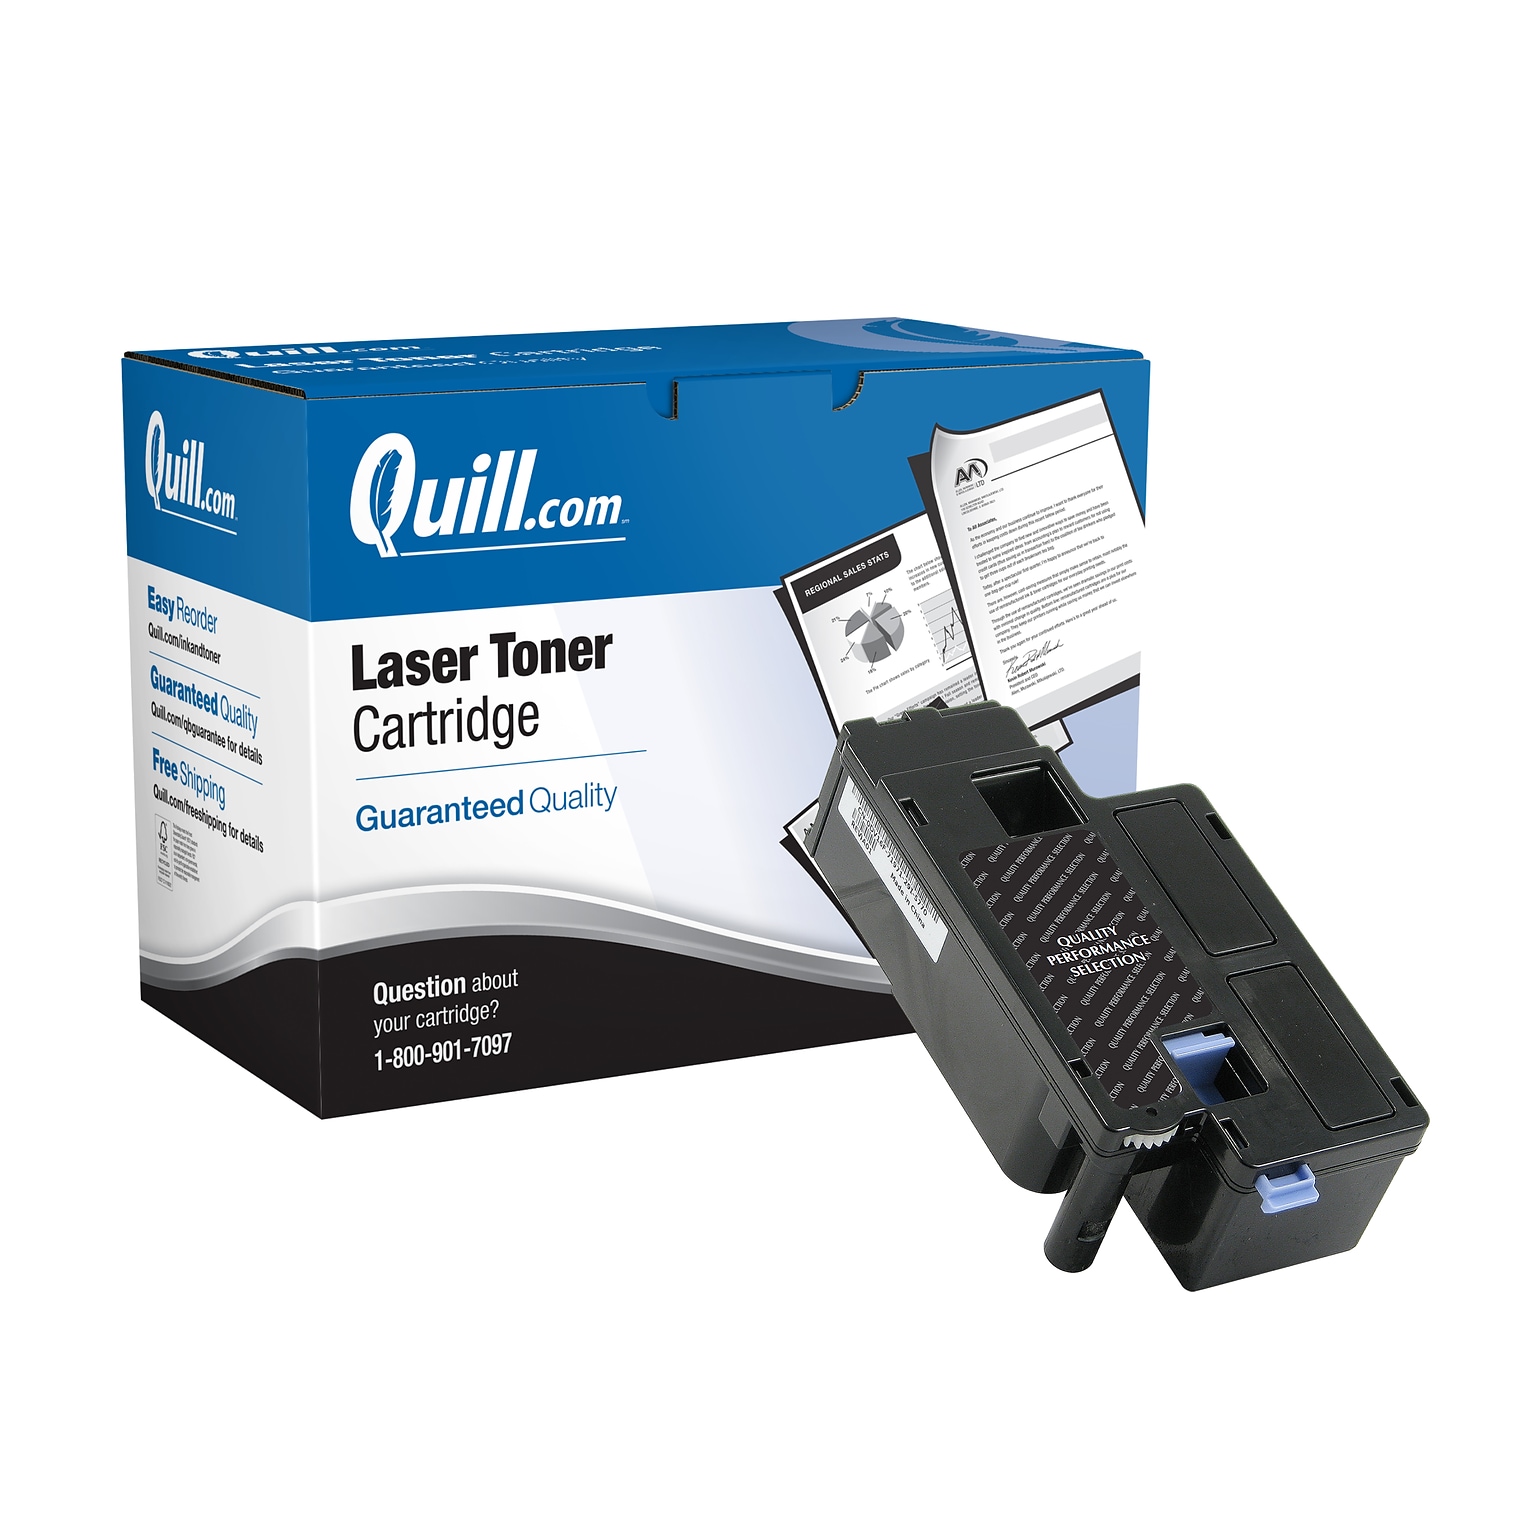 Quill Brand® Remanufactured Black High Yield Toner Cartridge Replacement for Dell 1250/1350/1355/C1760/C1765 (3K9XM)